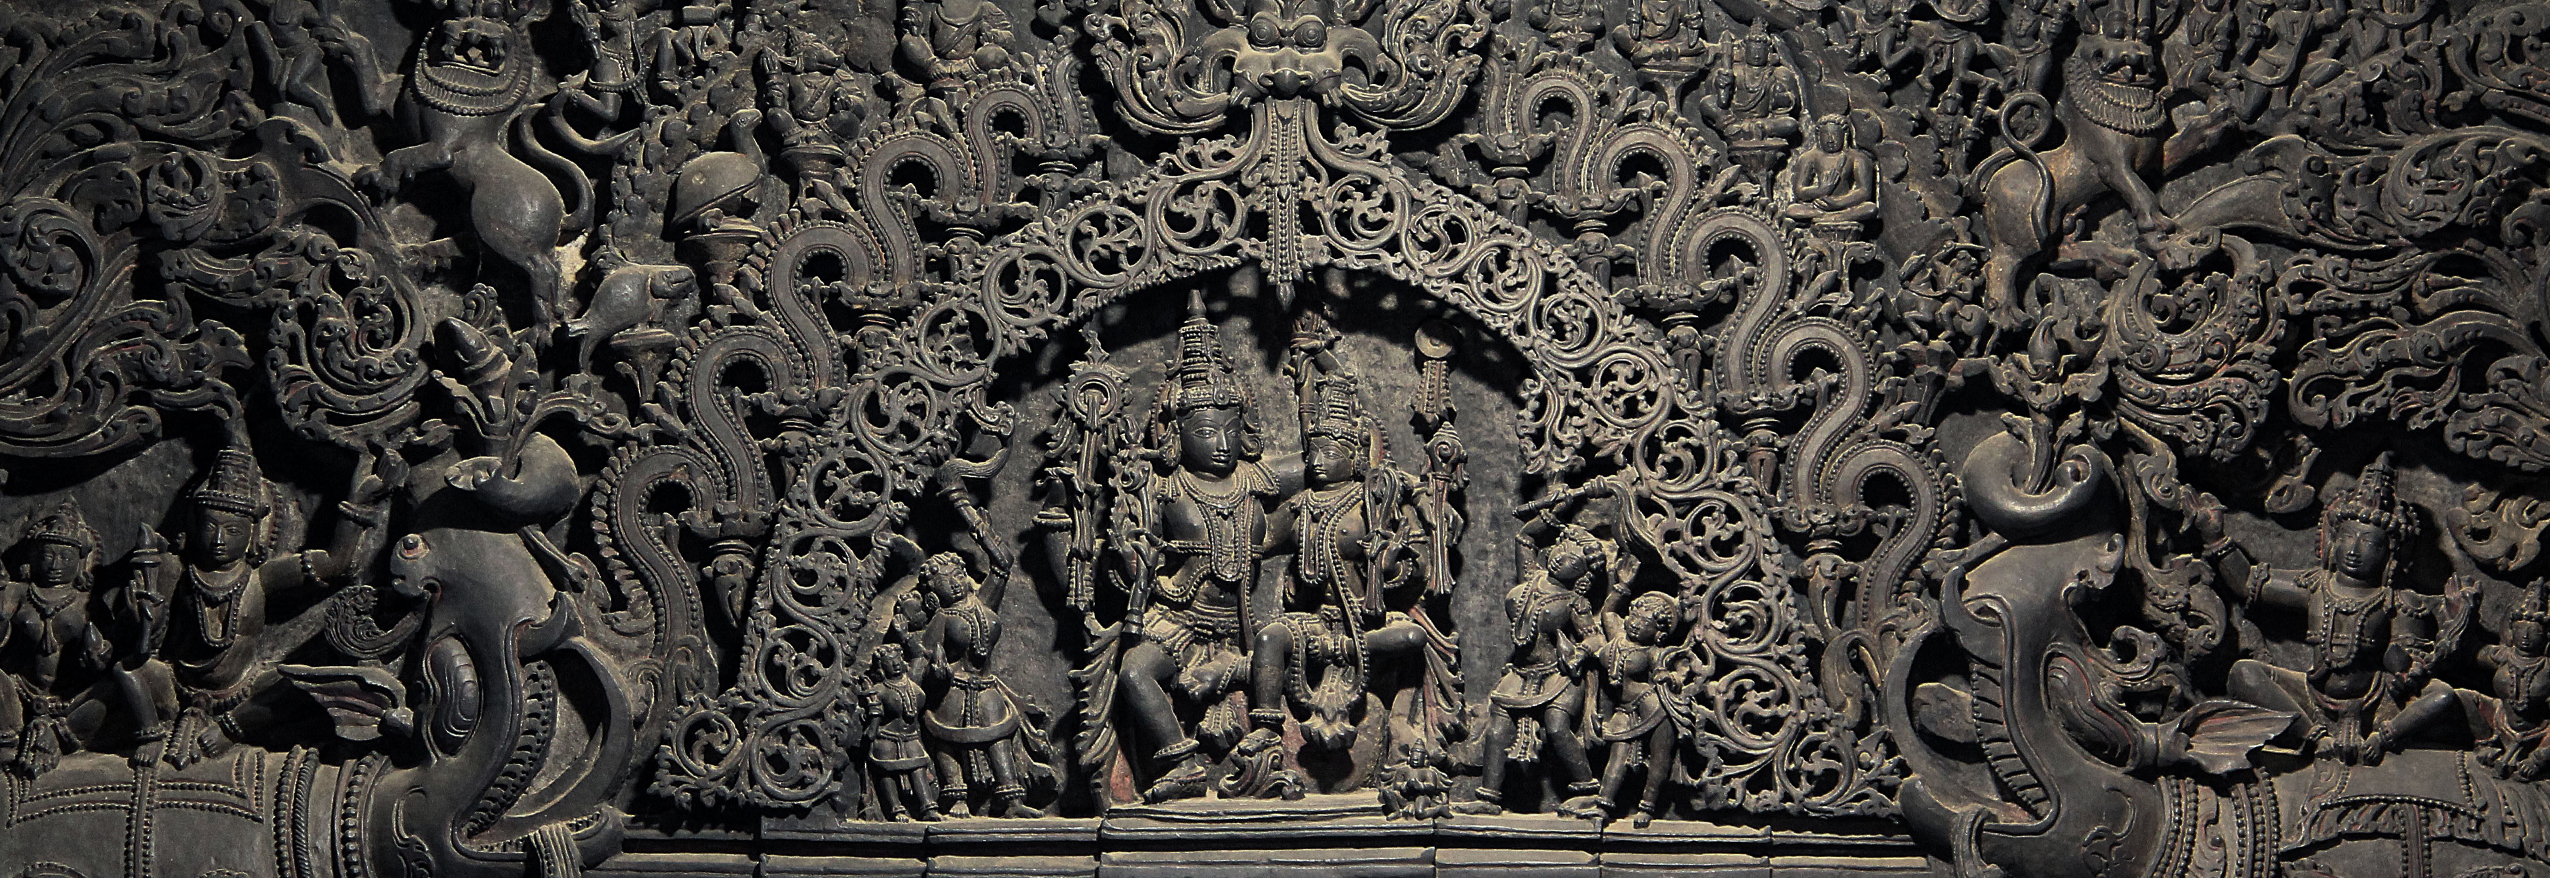 Stories from Signatures: Discovering Hoysala Master Sculptors